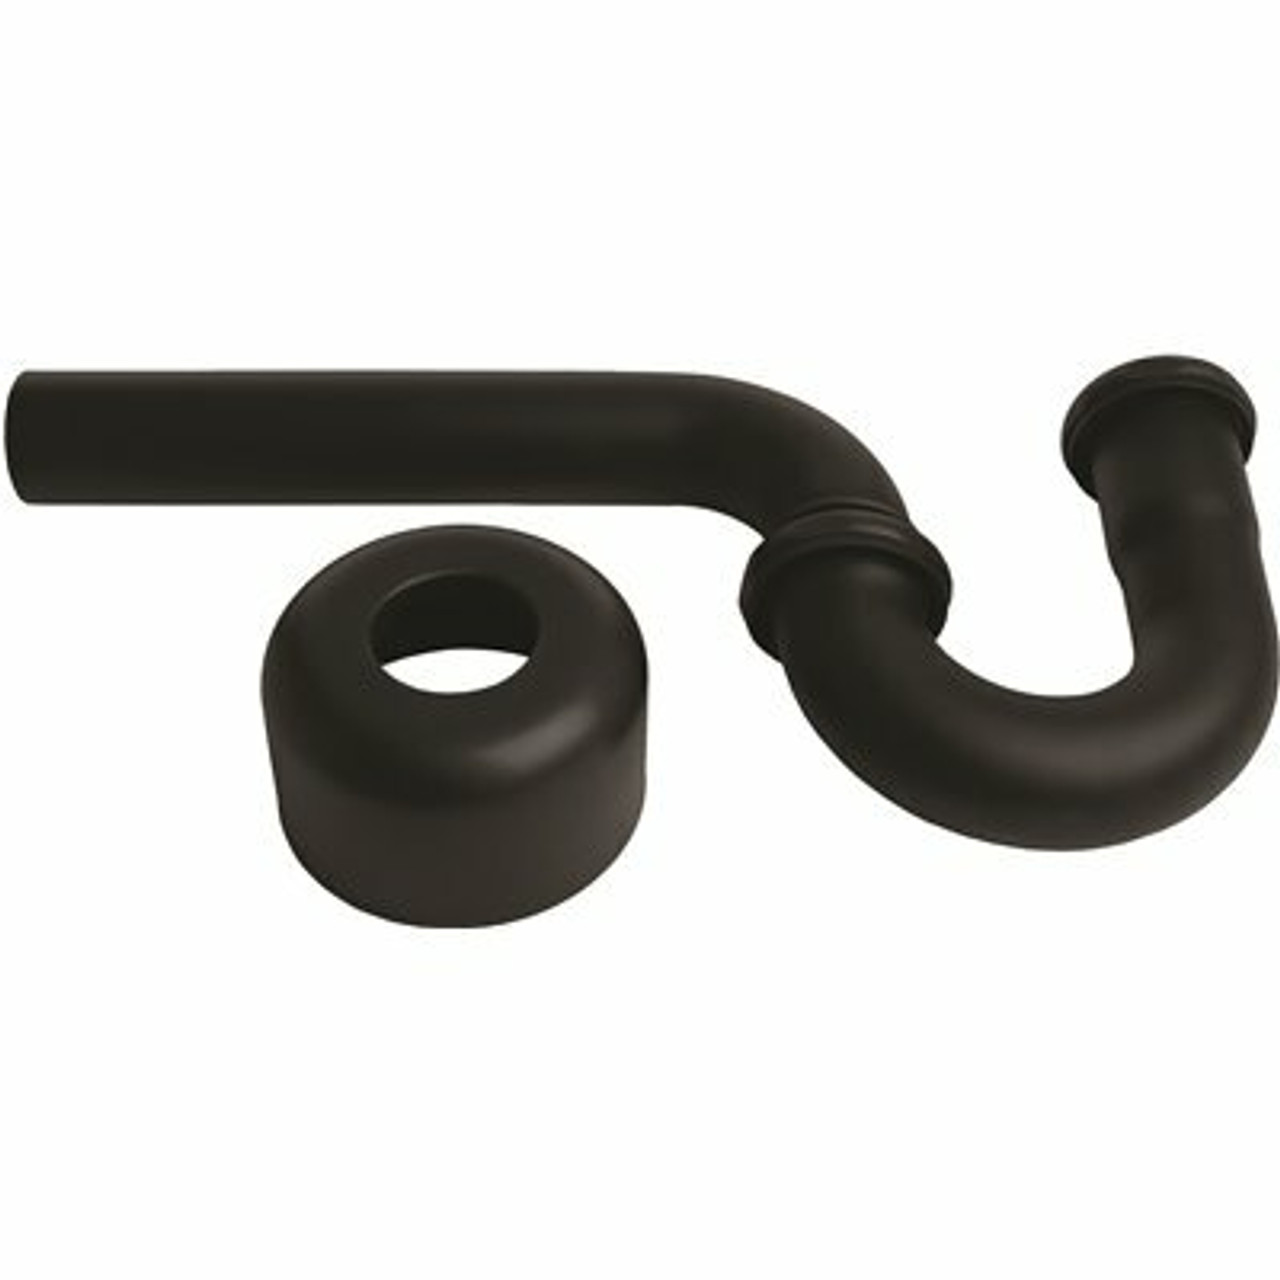 Westbrass 1-1/2 In. X 1-1/2 In. Brass P-Trap With Flange In Matte Black